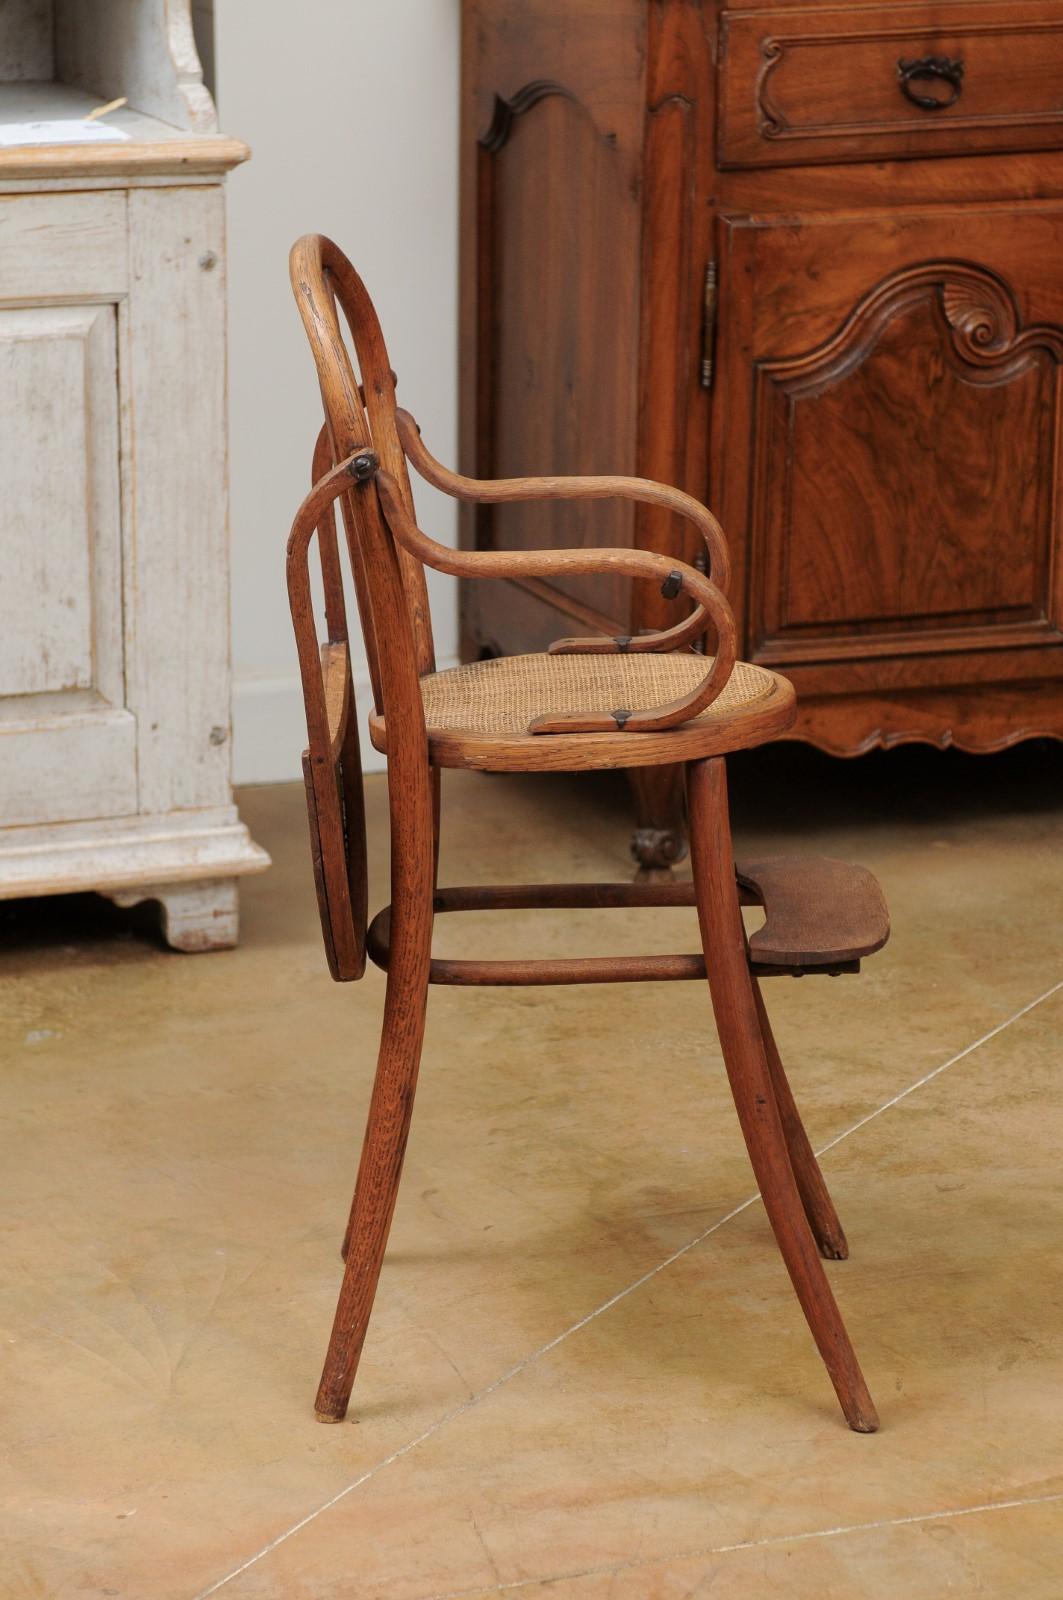 Wood French 19th Century Baby's High Chair with Cane Seat and Weathered Patina